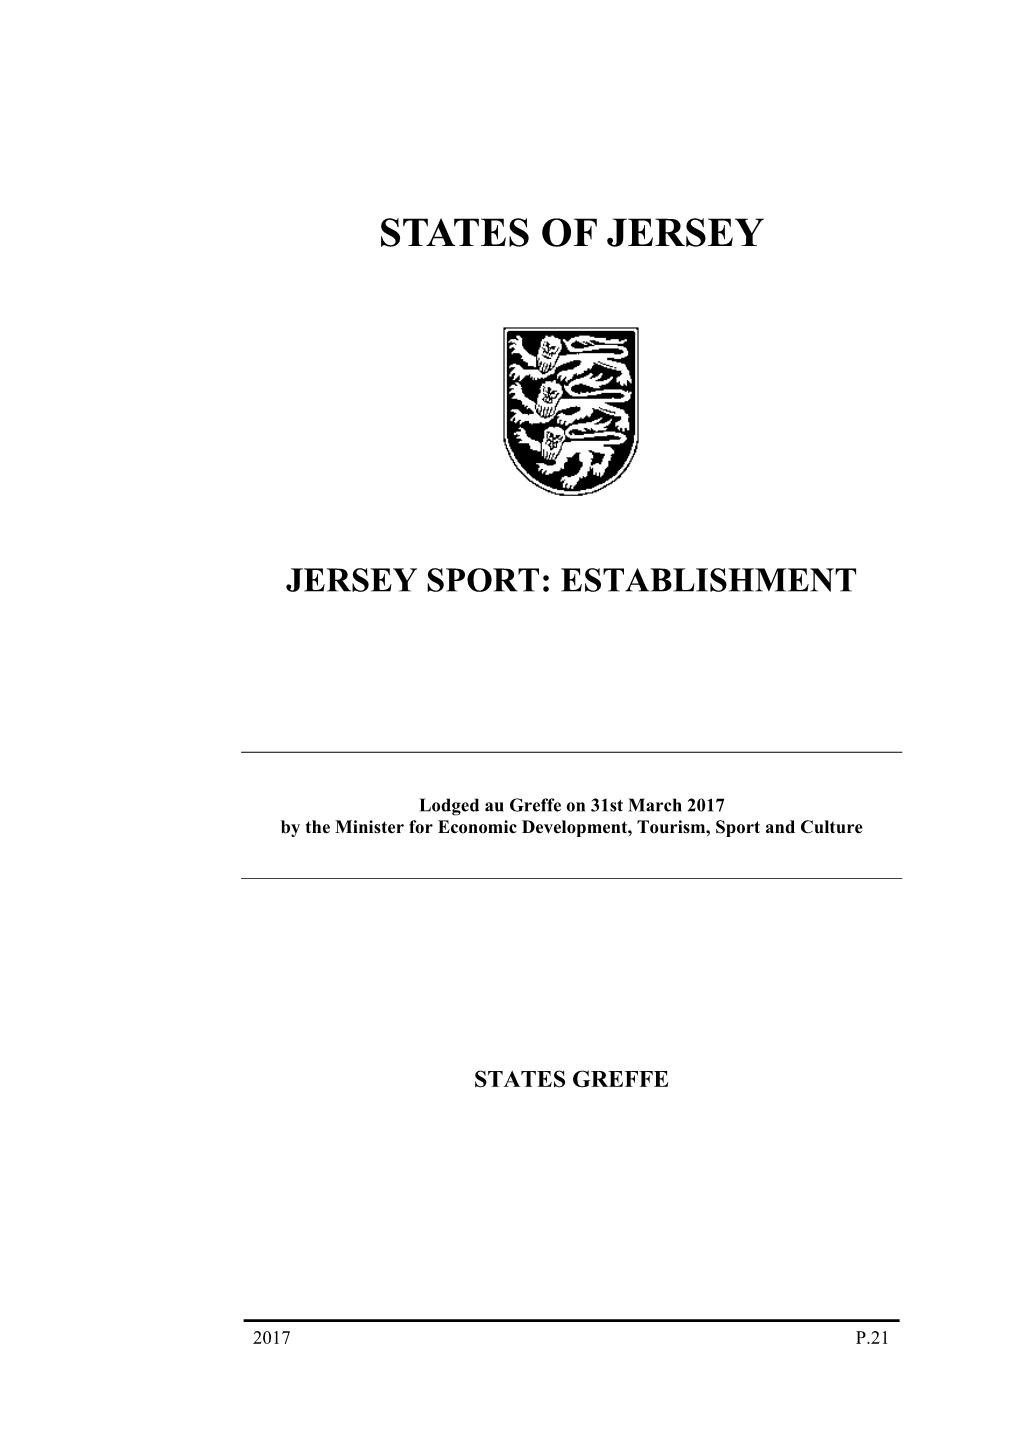 Jersey Sport Limited, a Company Limited by Shares in Accordance with the Attached ‘Articles of Association’